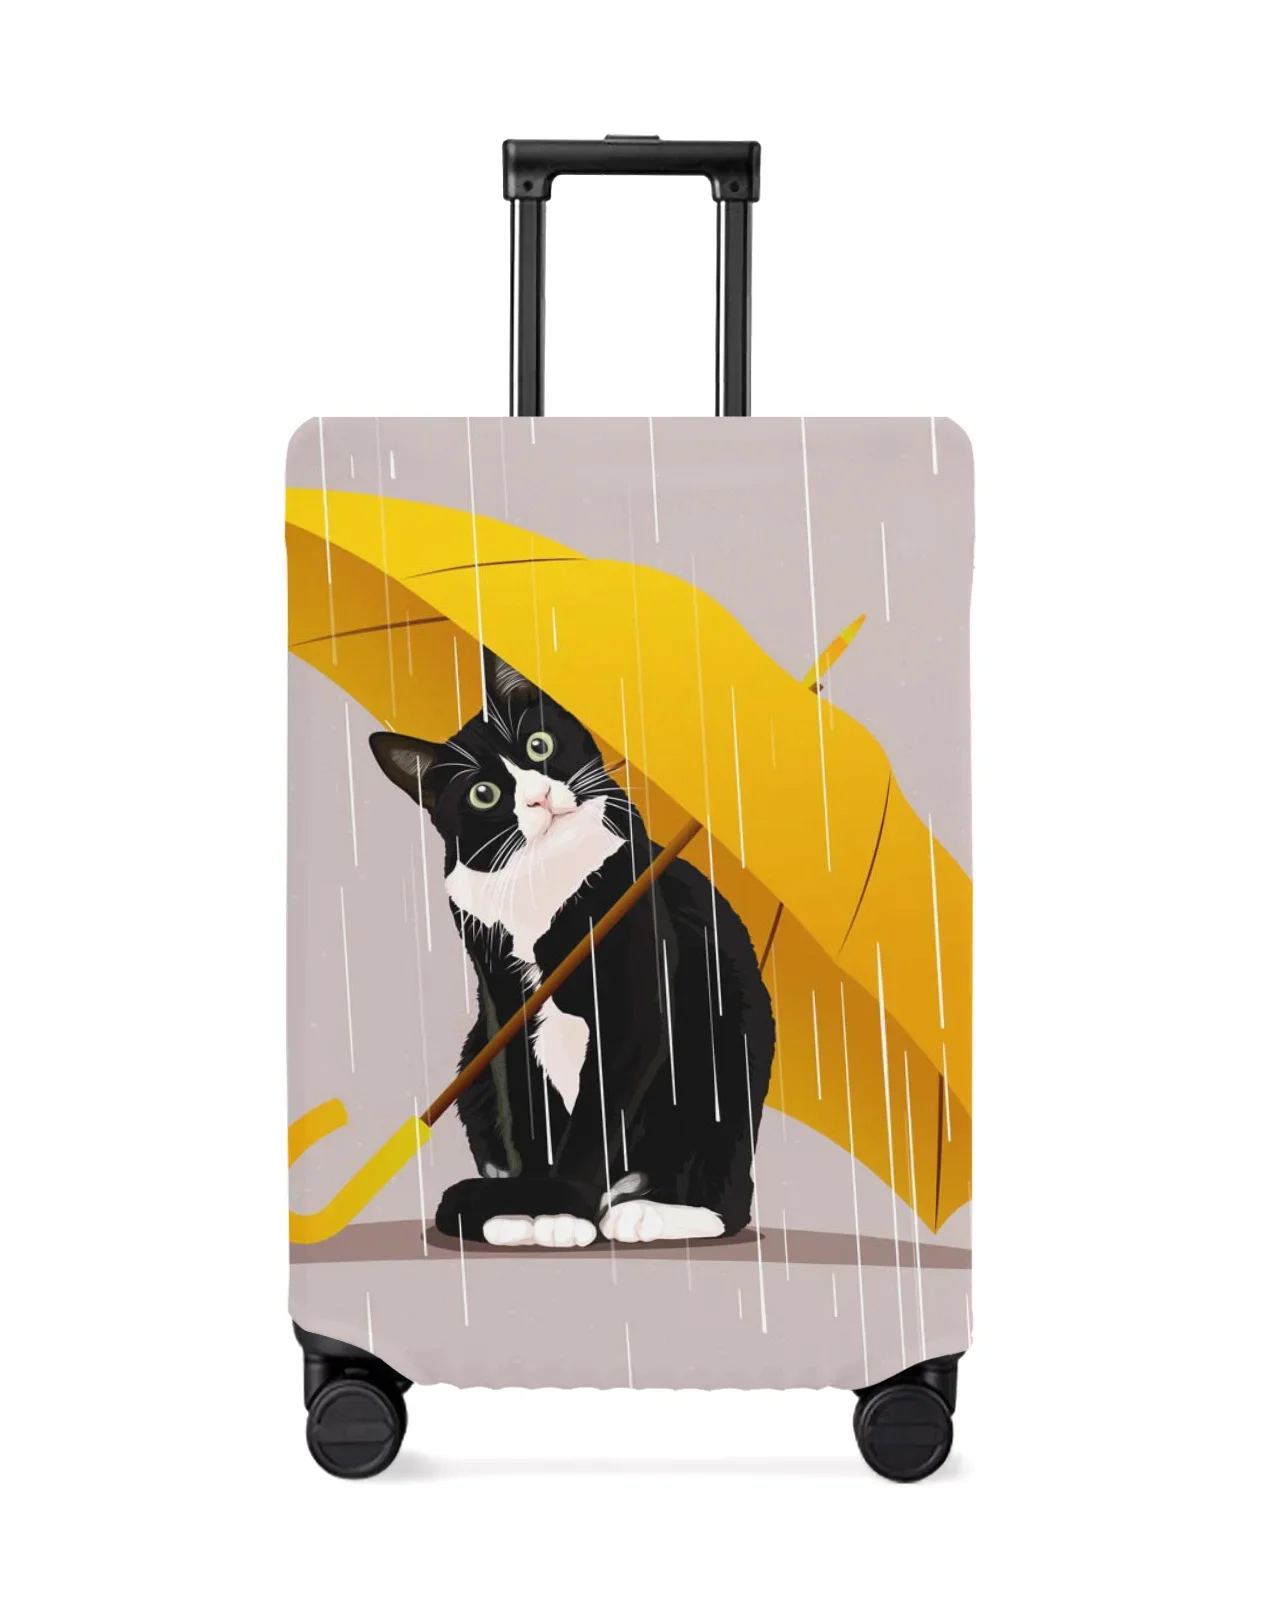 yellow-umbrella-cat-travel-luggage-cover-elastic-baggage-cover-for-18-32-inch-suitcase-case-dust-cover-travel-accessories